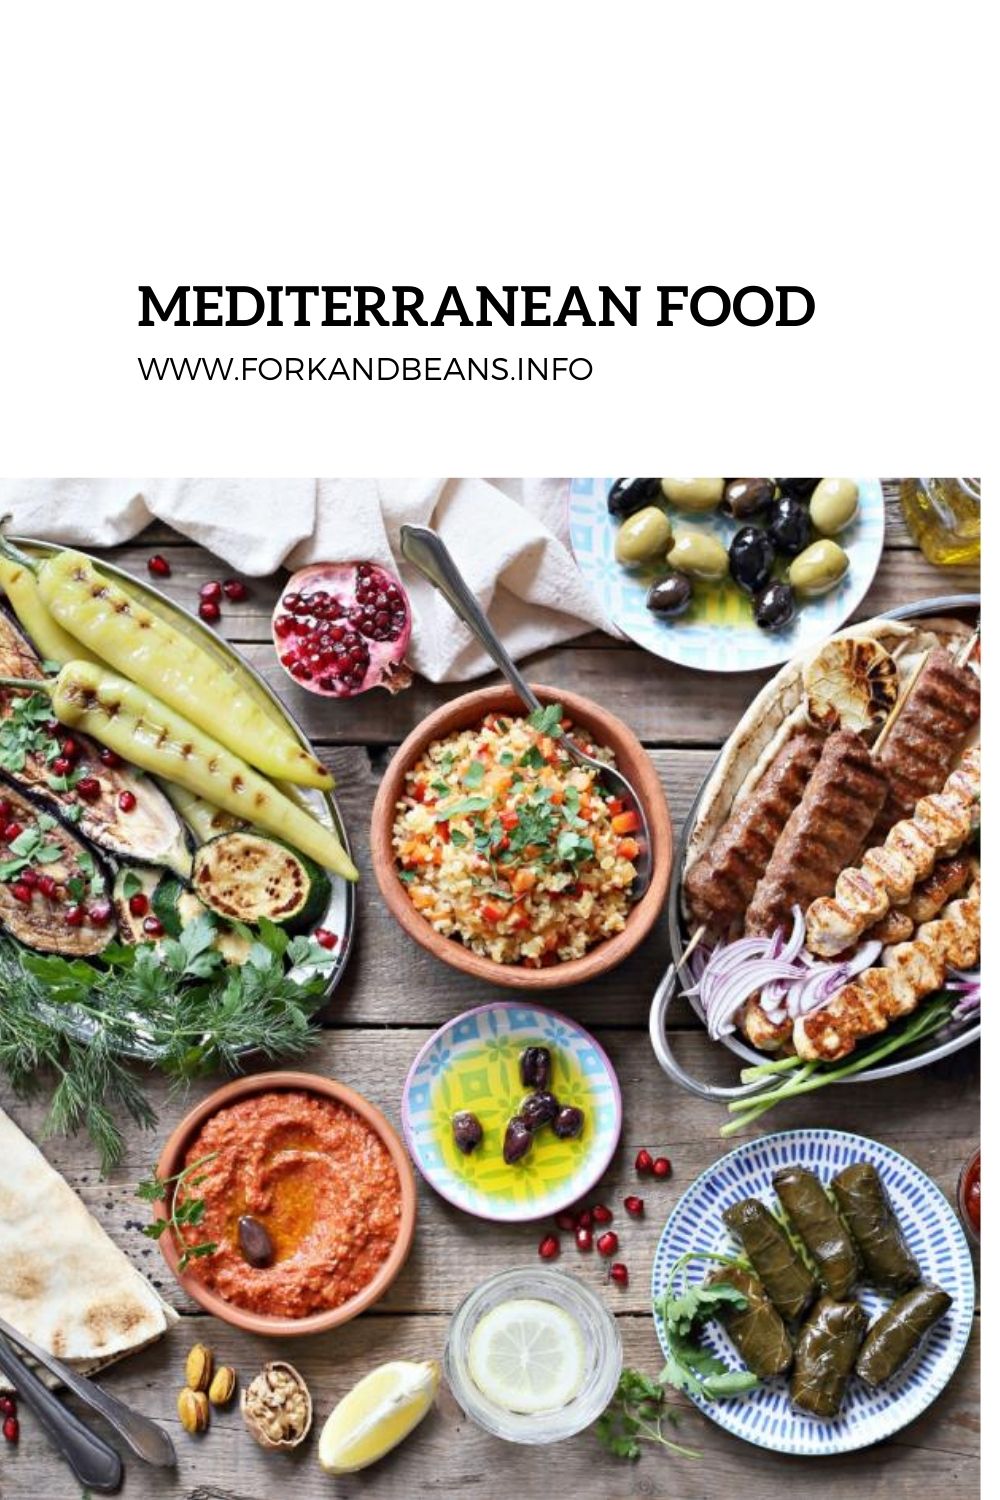 What Countries Are Considered Mediterranean Food?